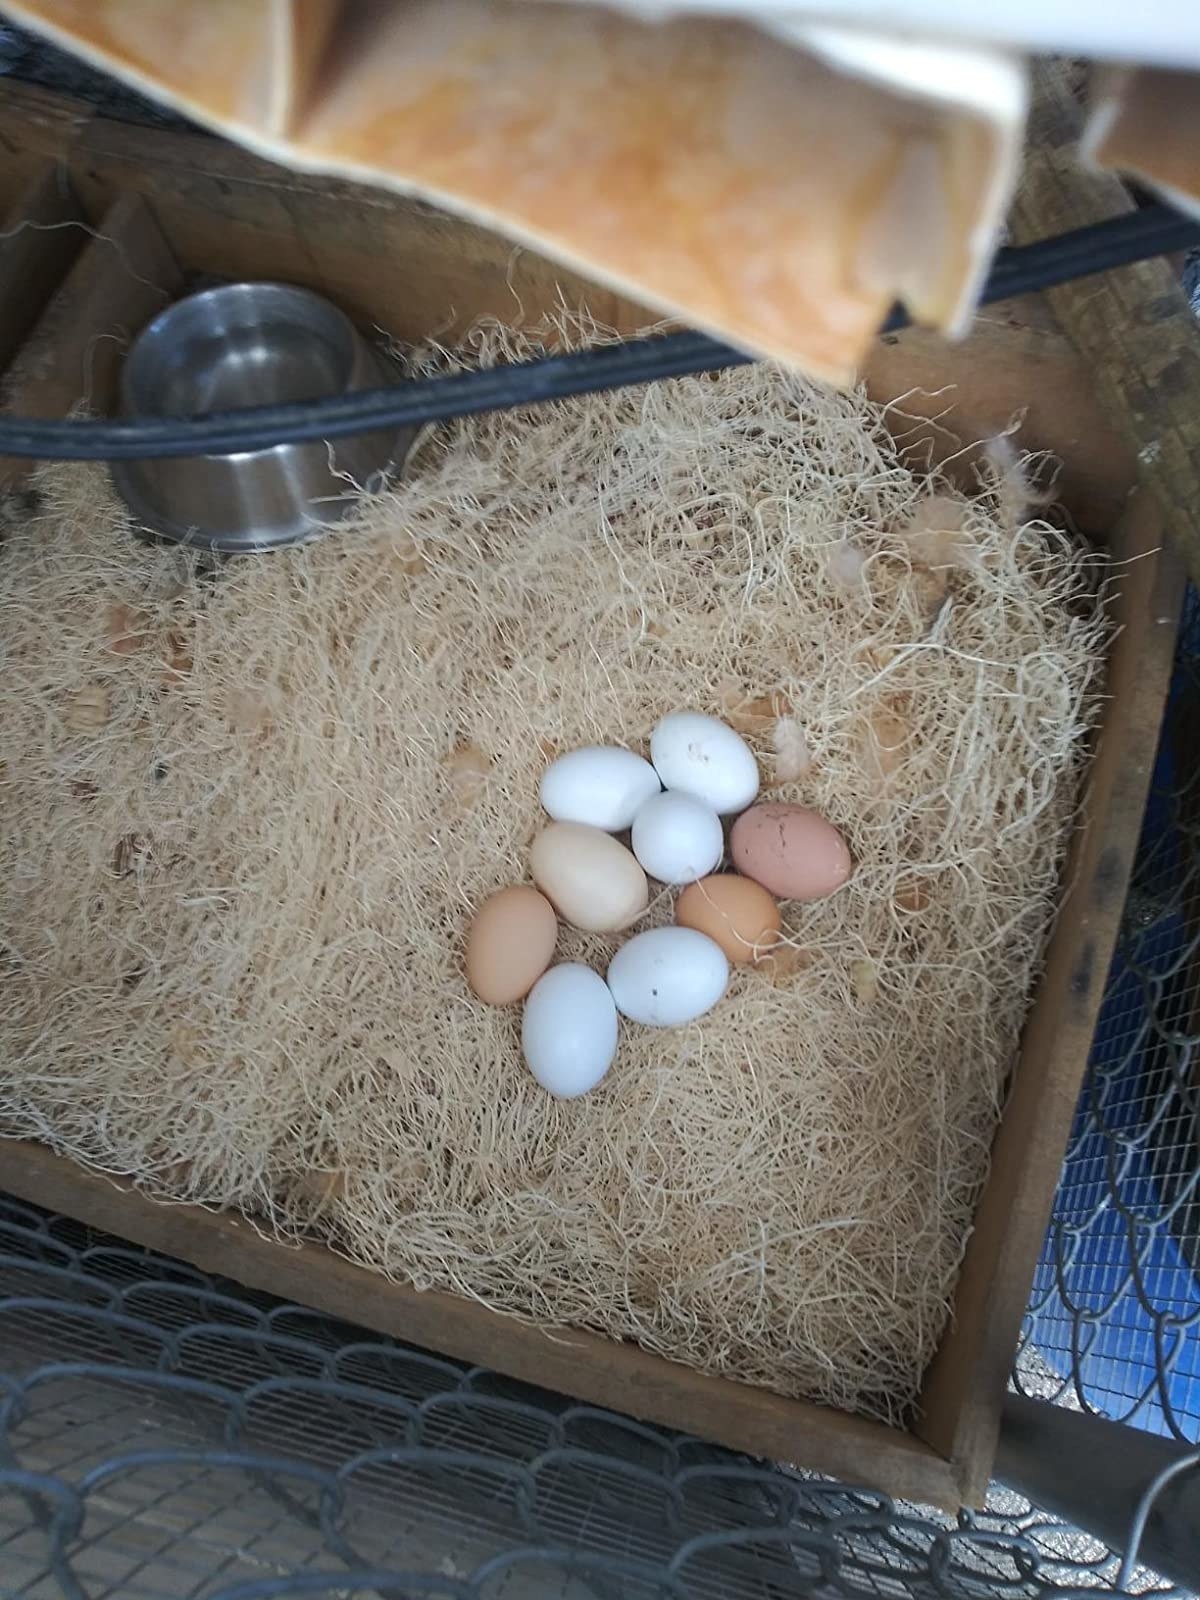 The nesting pad, which can softly support eggs without letting them break